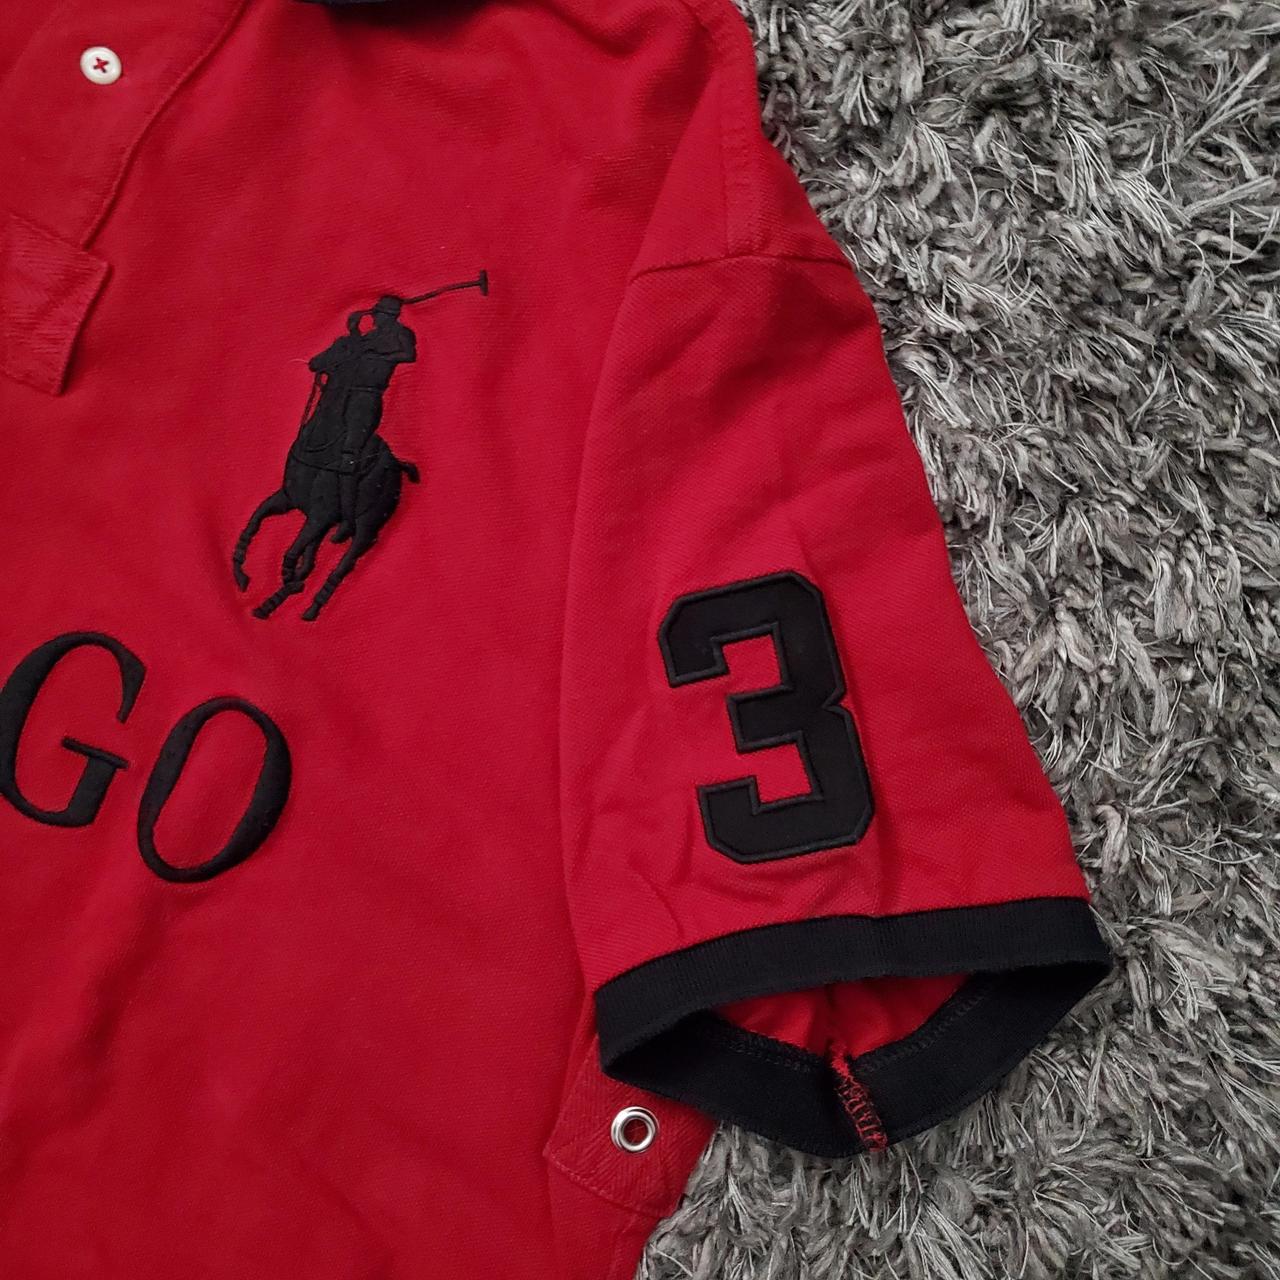 Fire Chicago polo these always so clean to wear on... - Depop